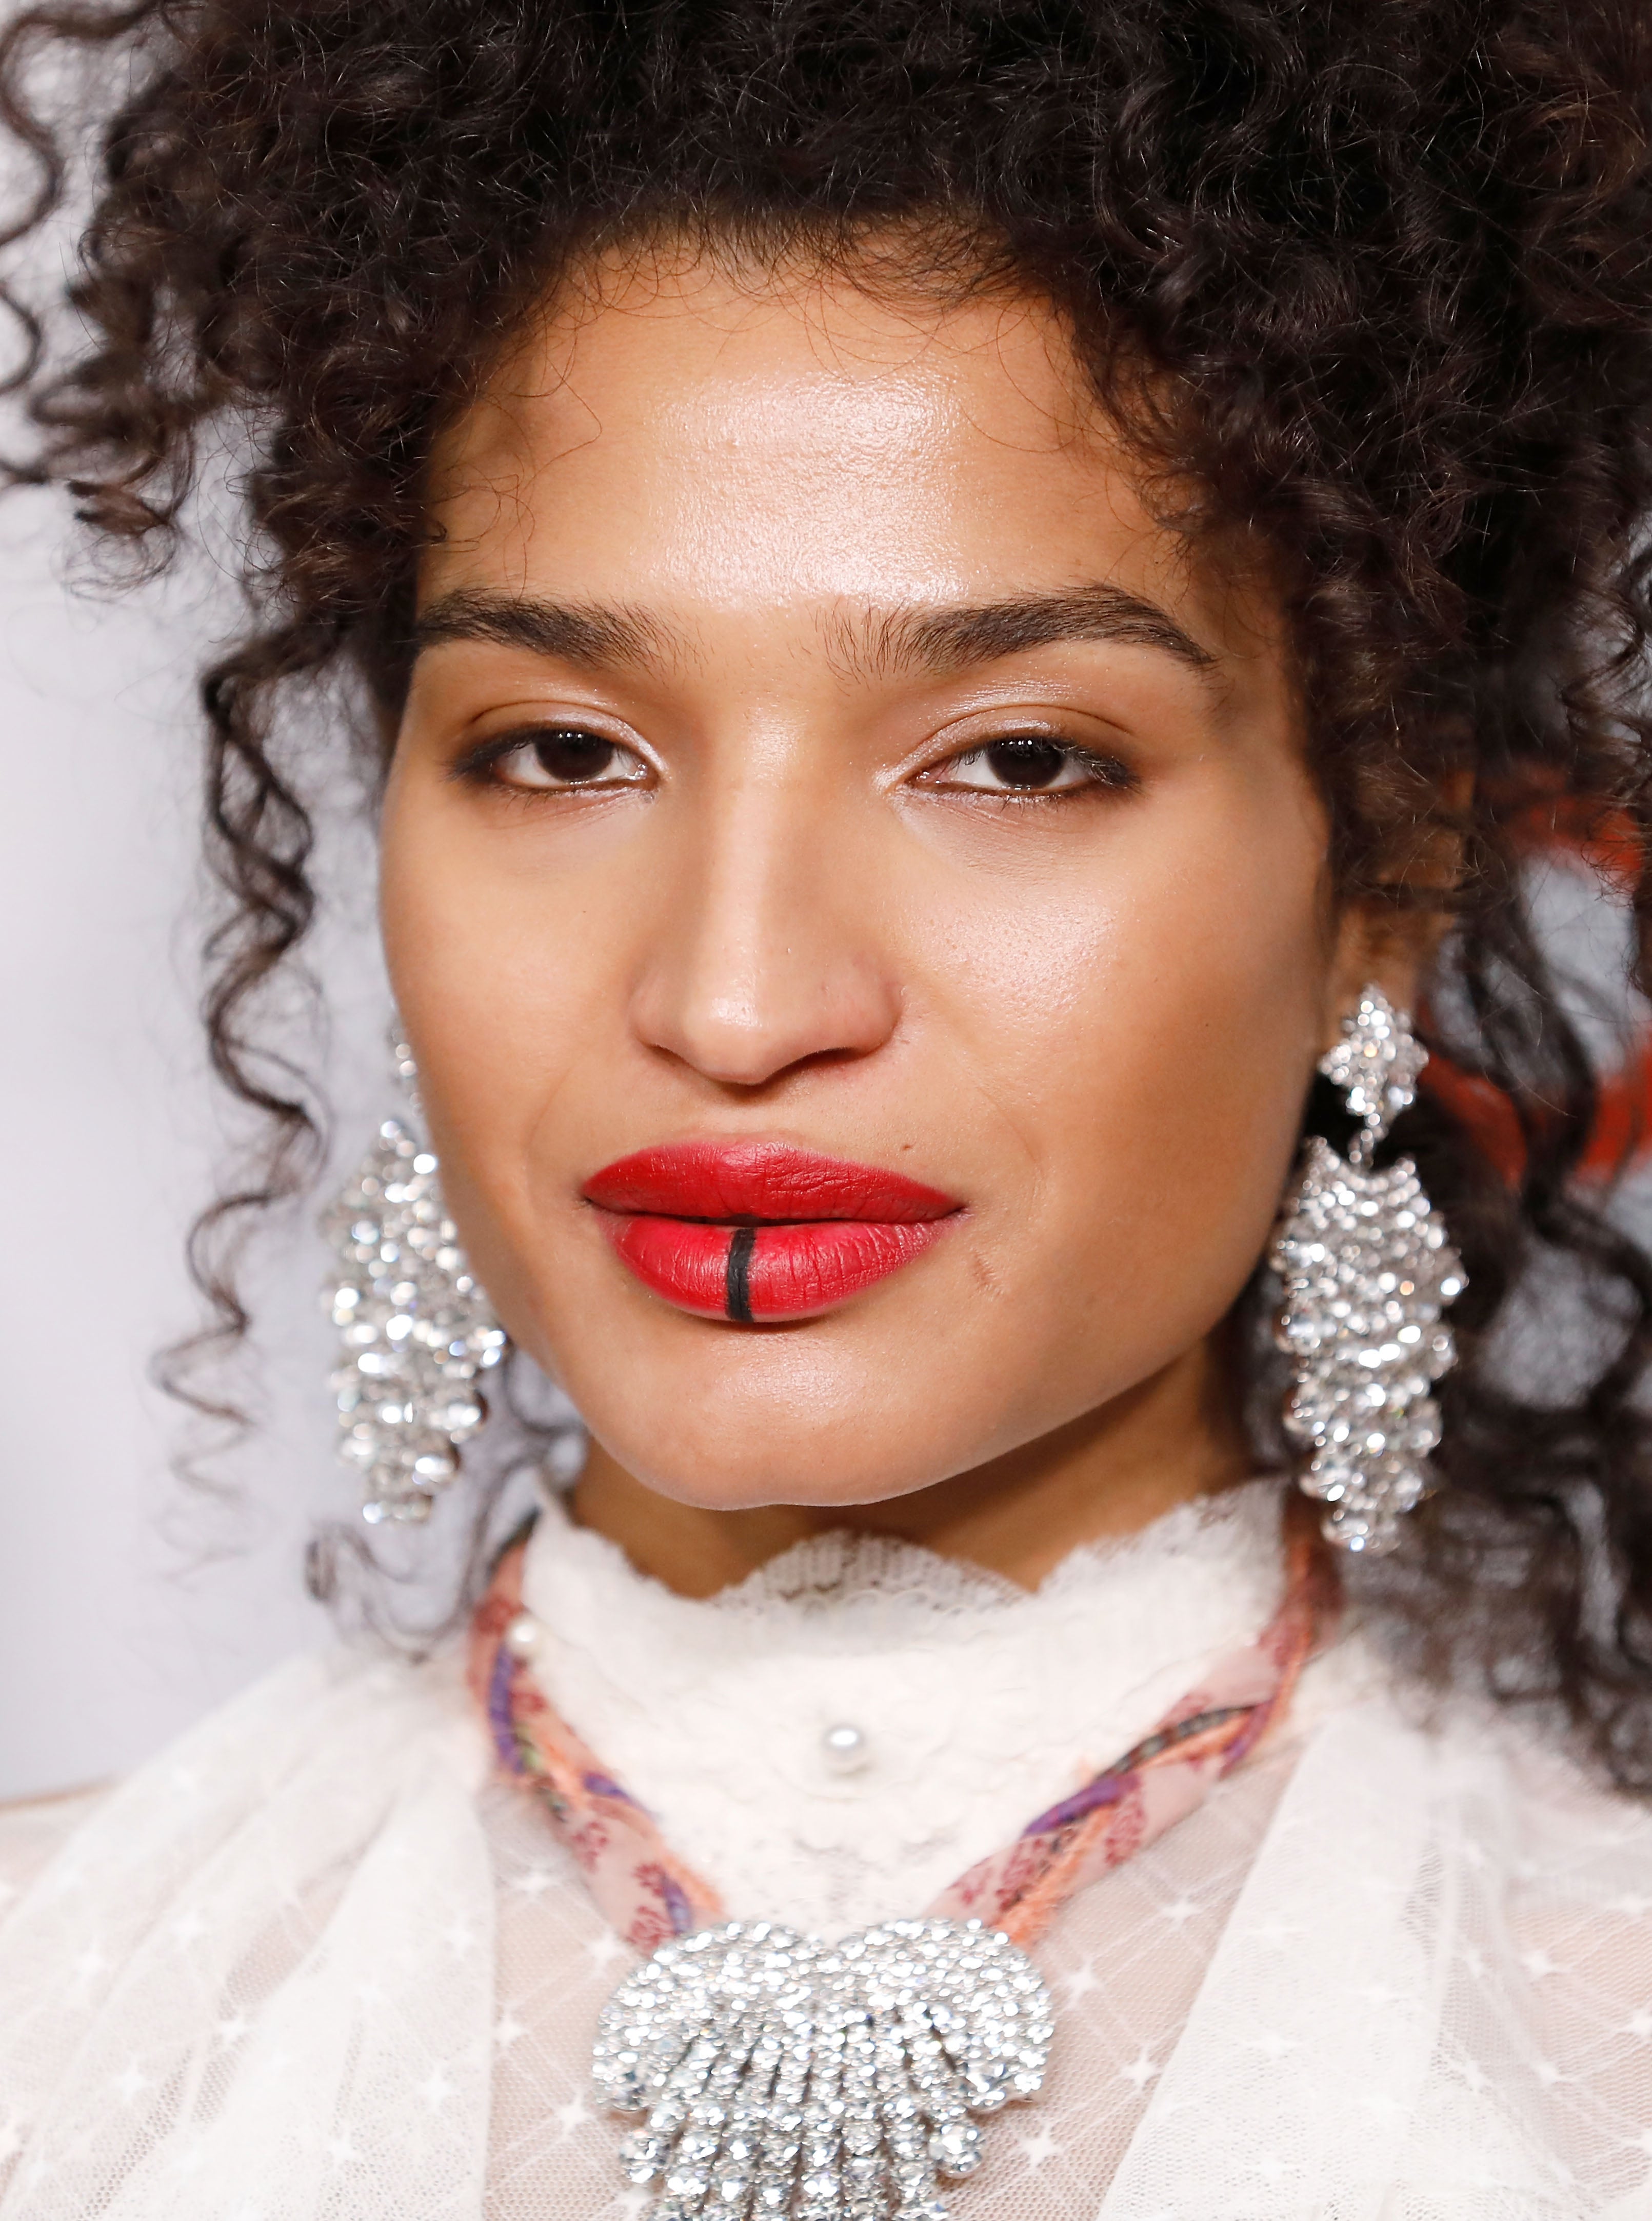 12 Times Indya Moore's Red Carpet Pose Gave Us A True Beauty Moment